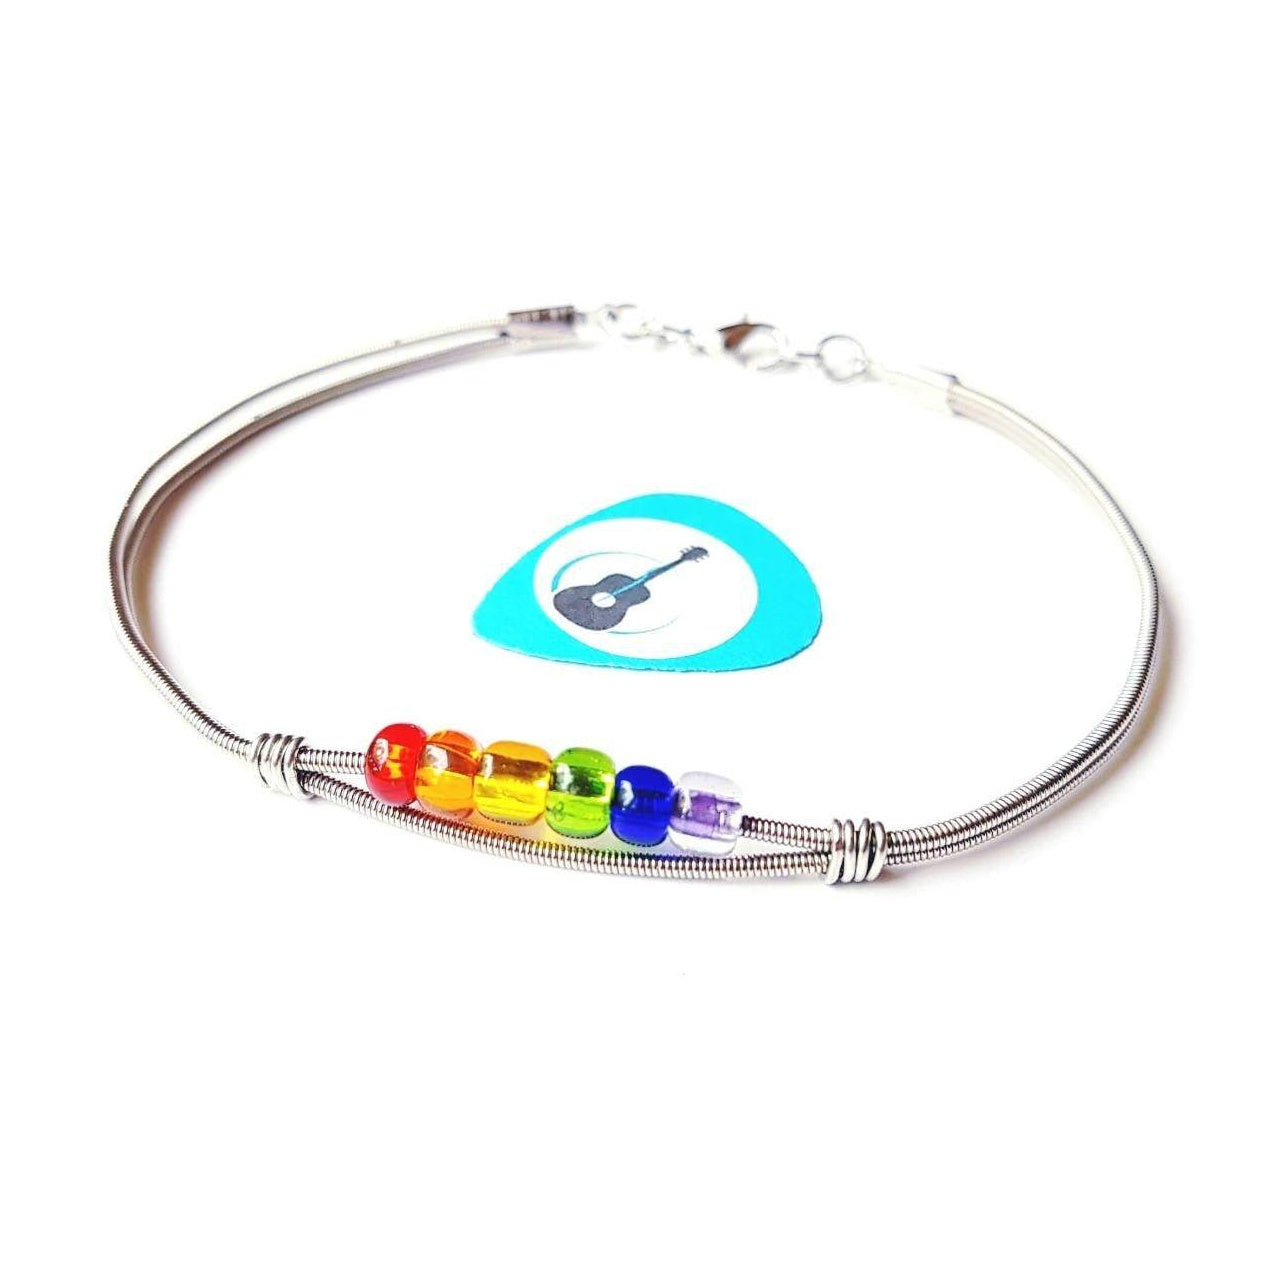 clasp style bracelet made from an upcycled guitar string - 6 glass beads represent the colours of the LGBTQ flag (red, orange, yellow, green, blue and purple) - blue guitar pick with an image of a black guitar - white background